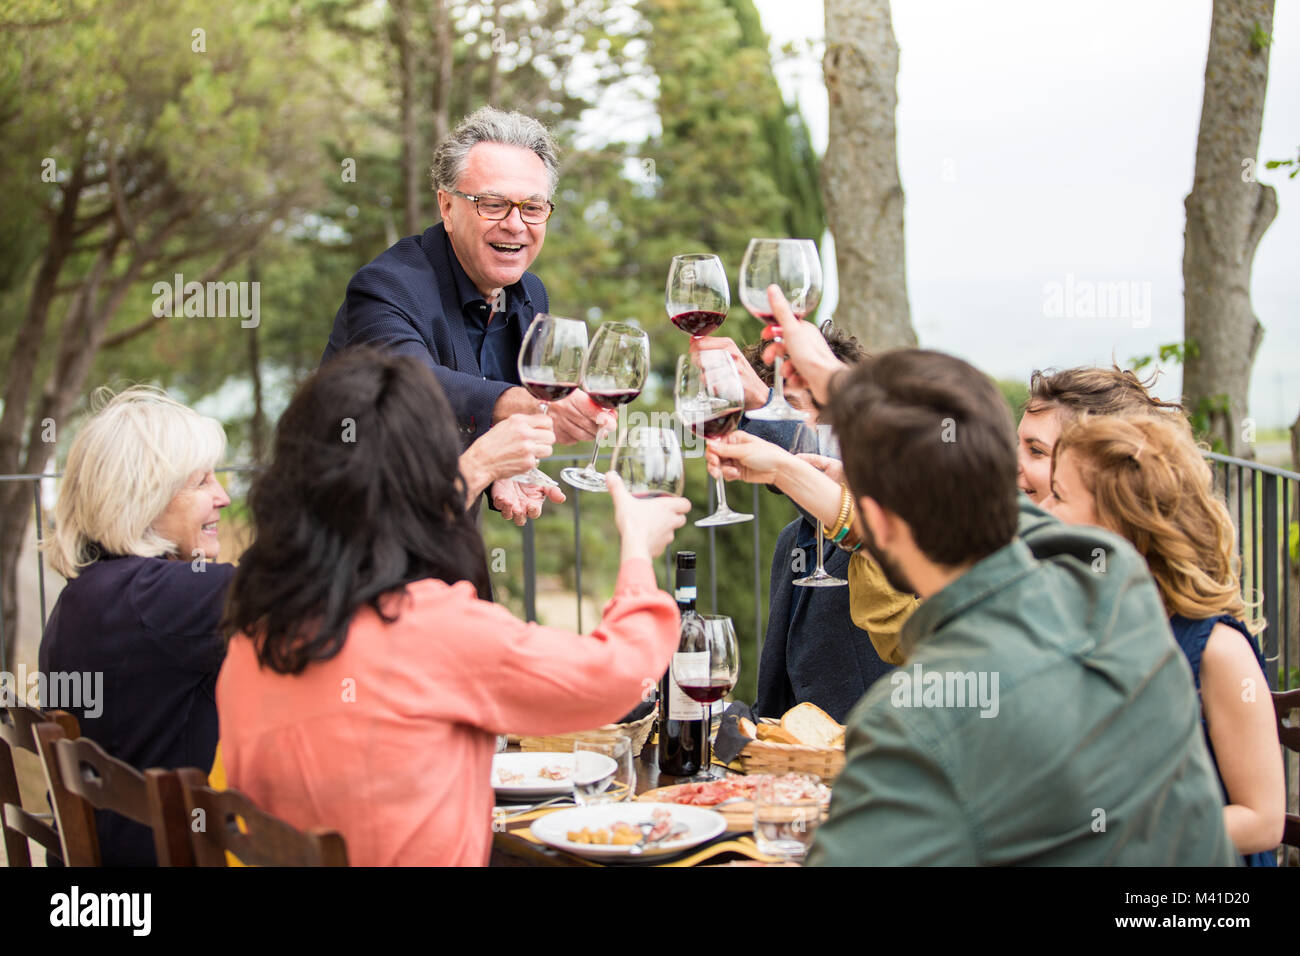 Family eating alfresco, clinking glasses Banque D'Images